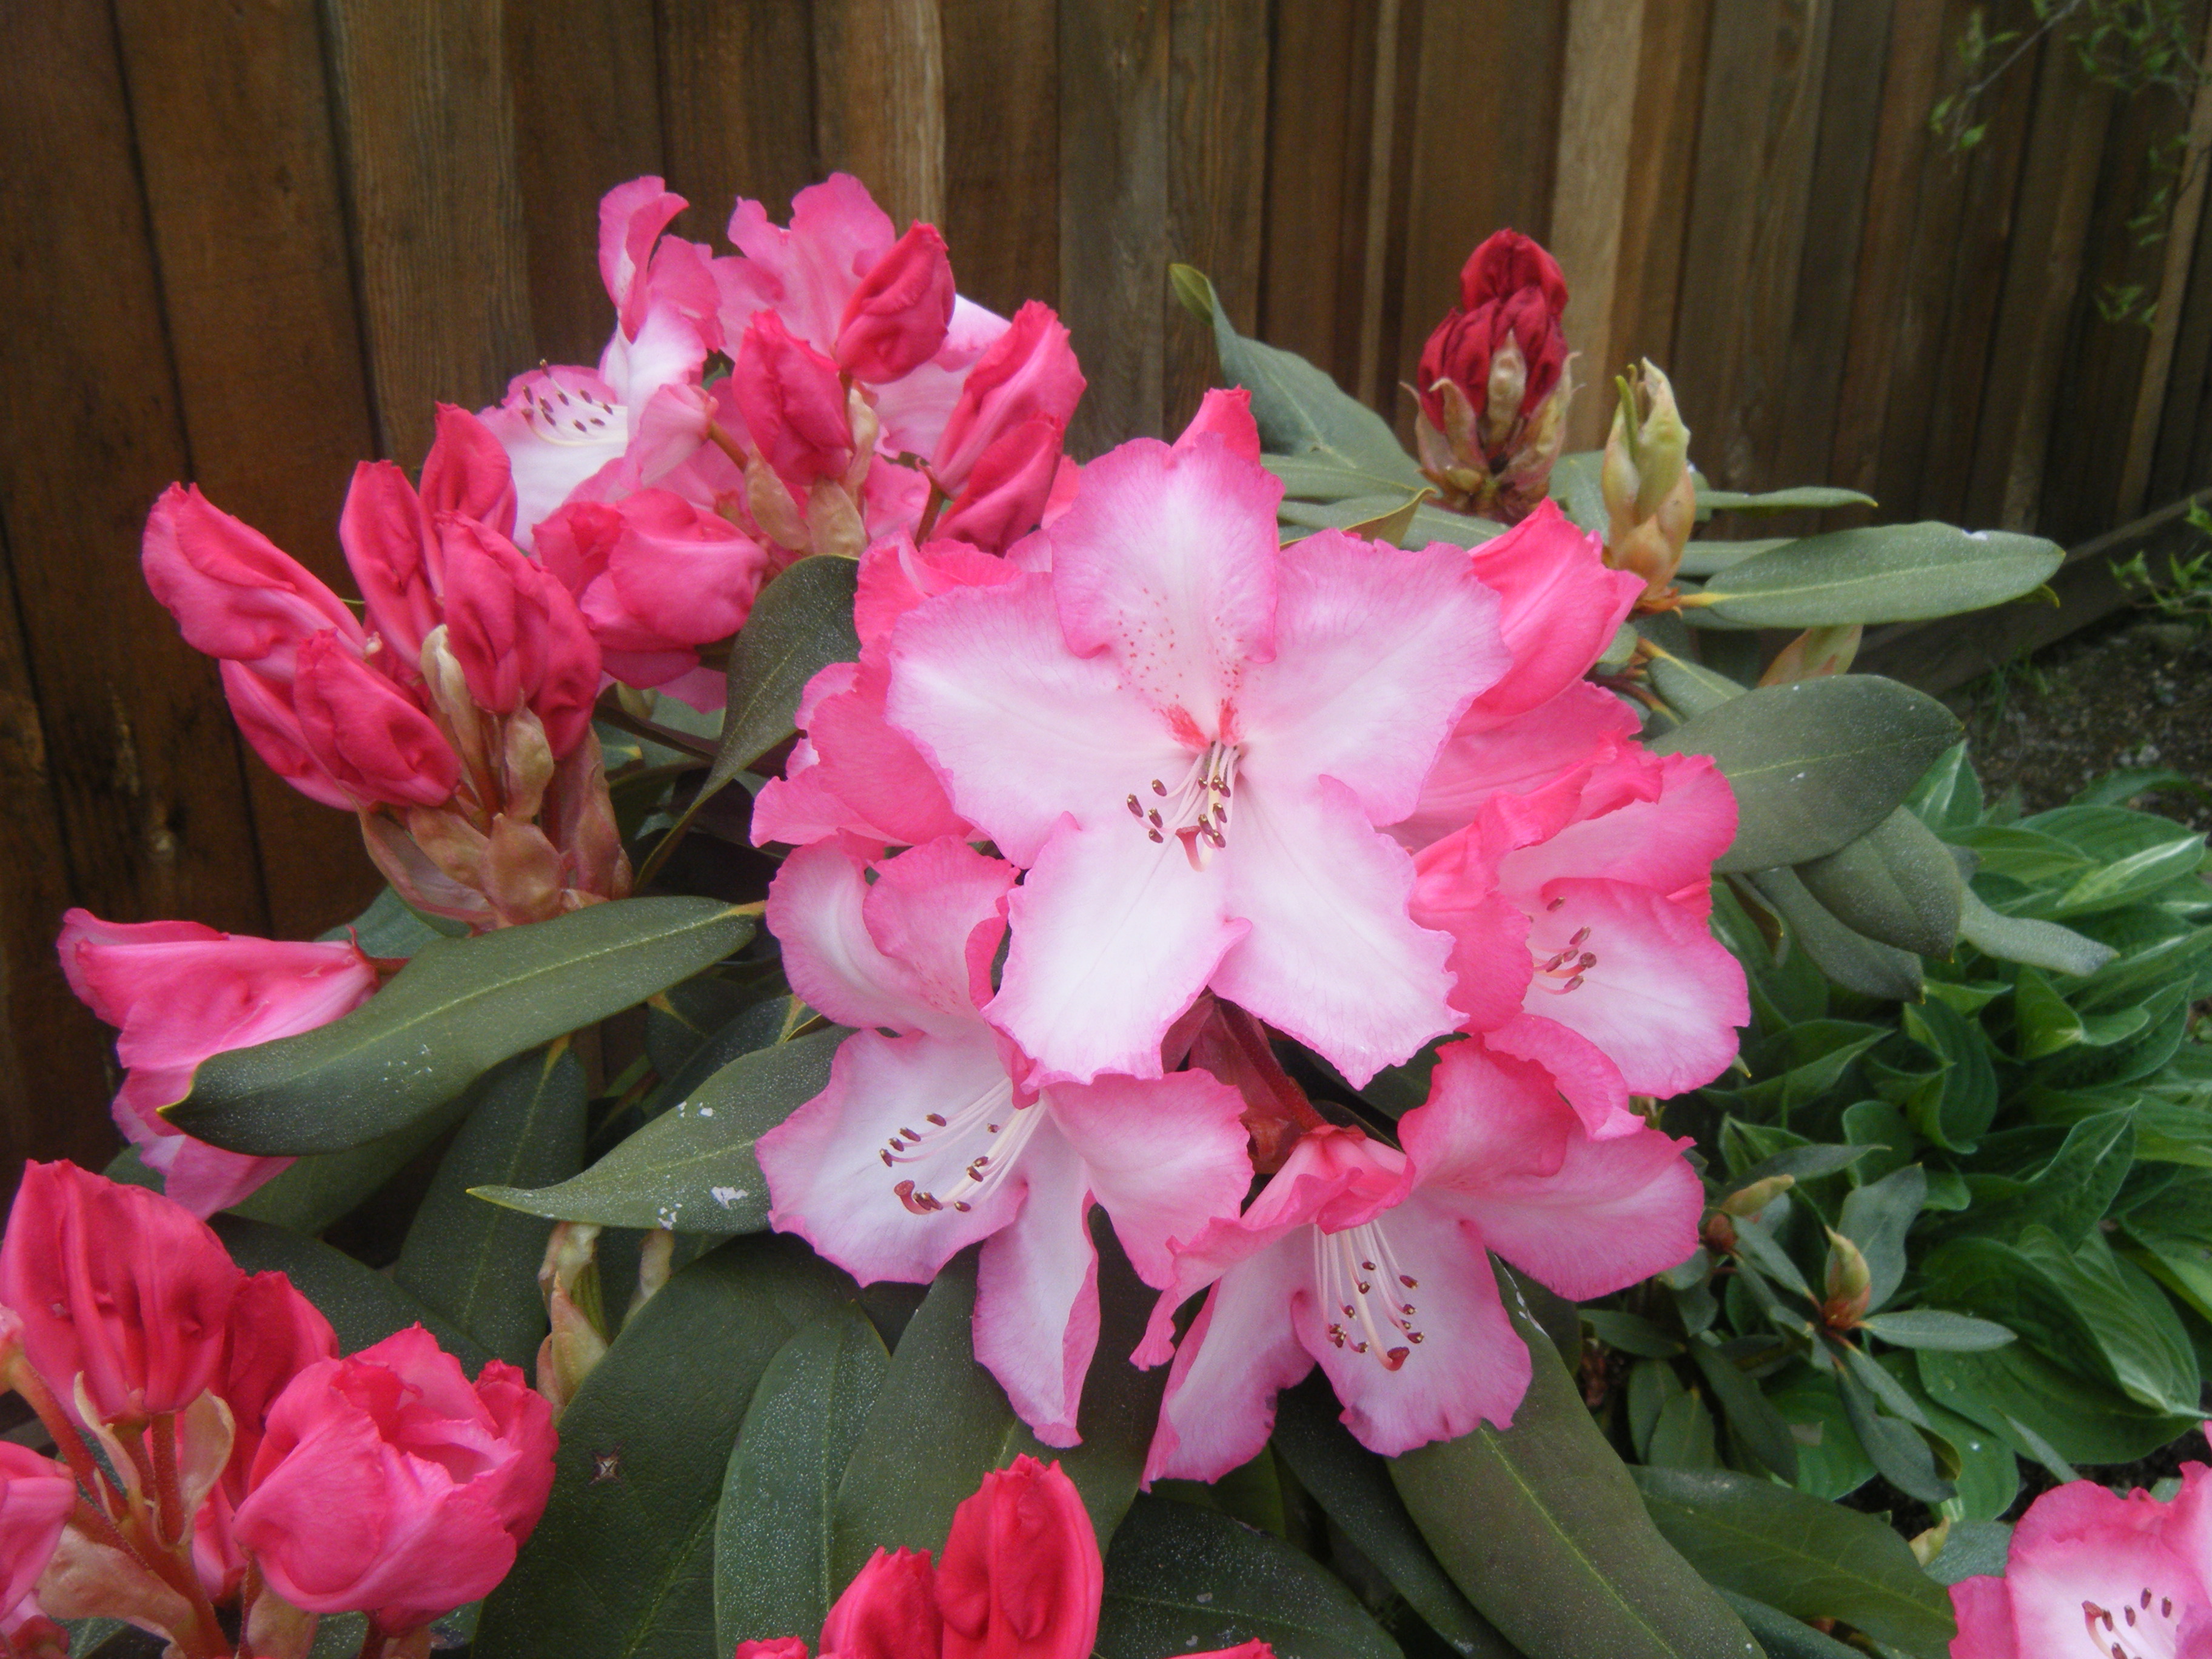 Rhododendrons in Bloom | Hortophile – My New Garden